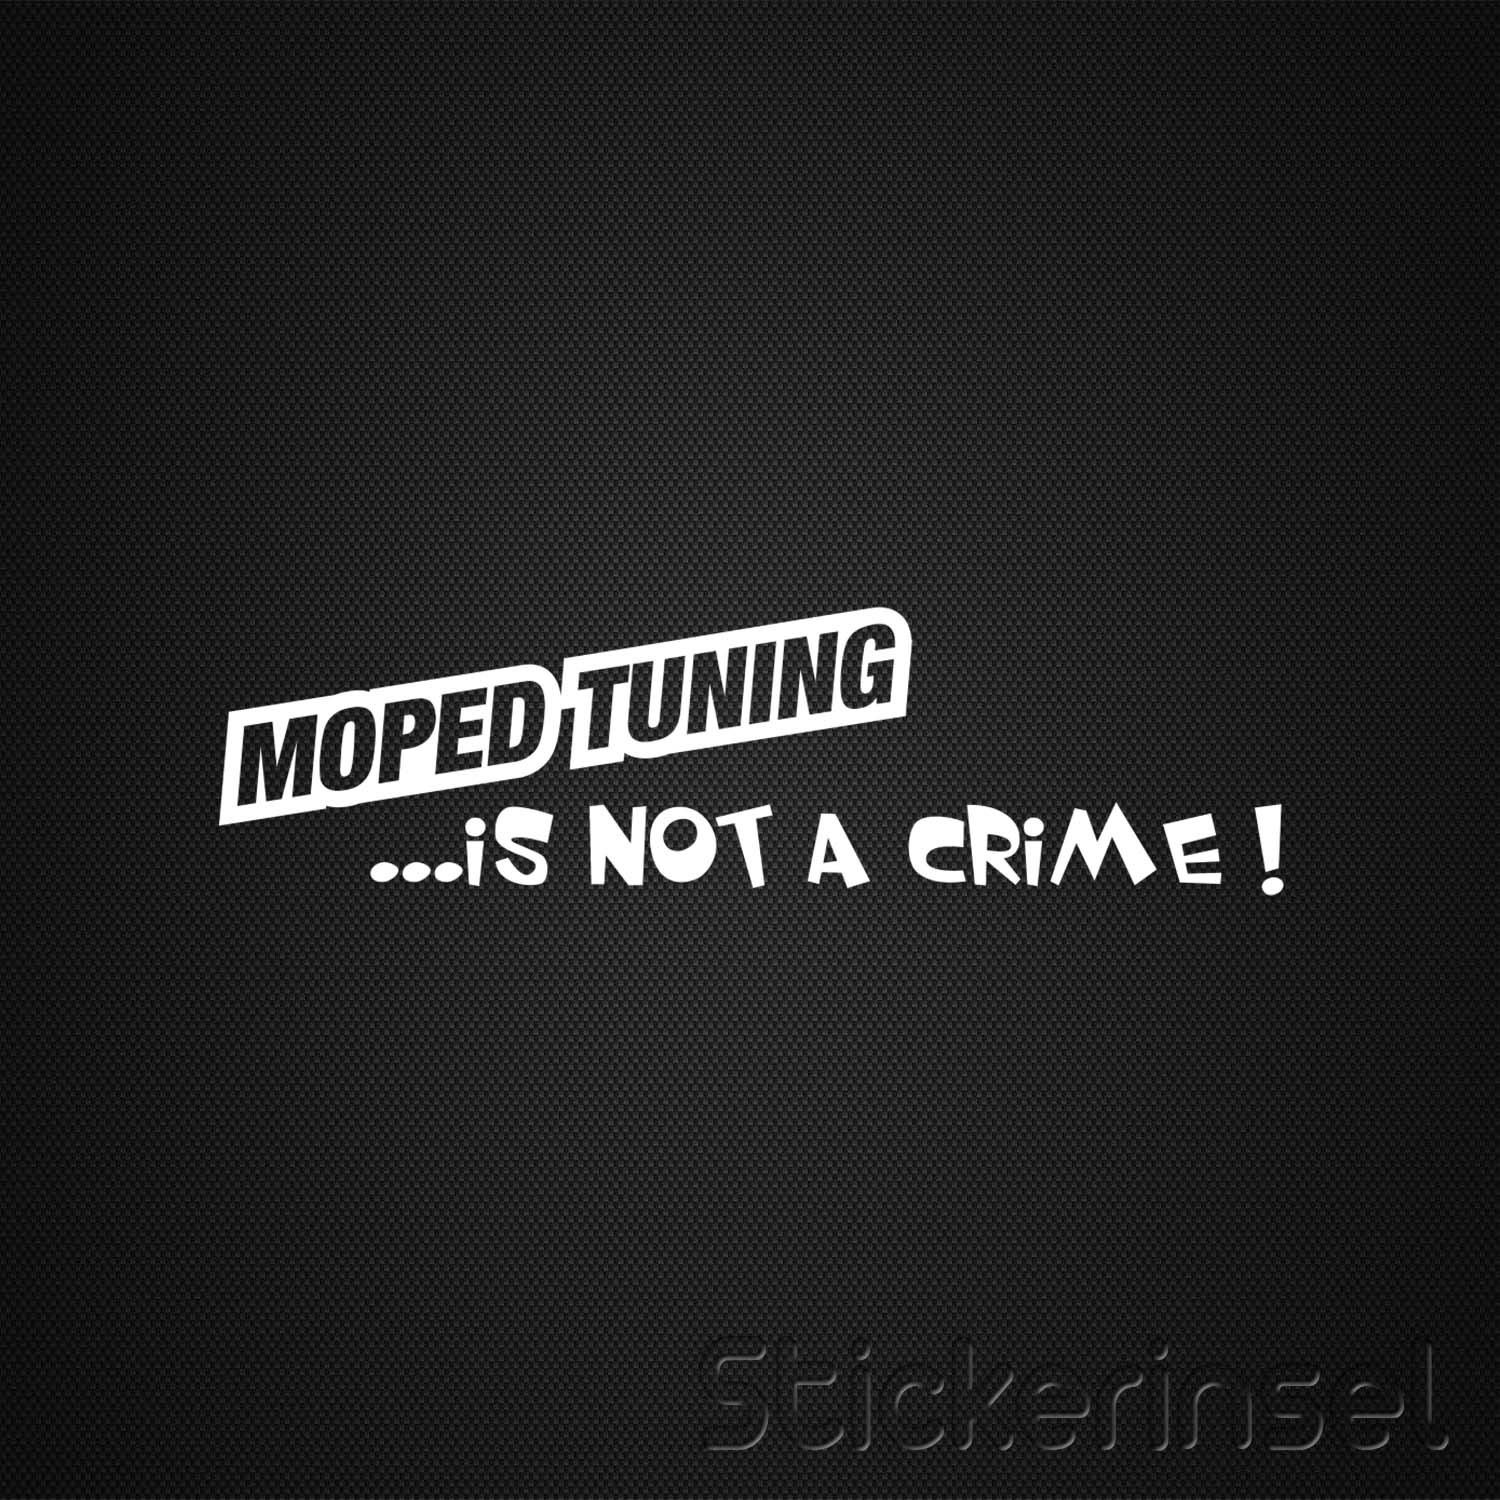 Moped Tuning is not a Crime » Stickerinsel - Autoaufkleber und